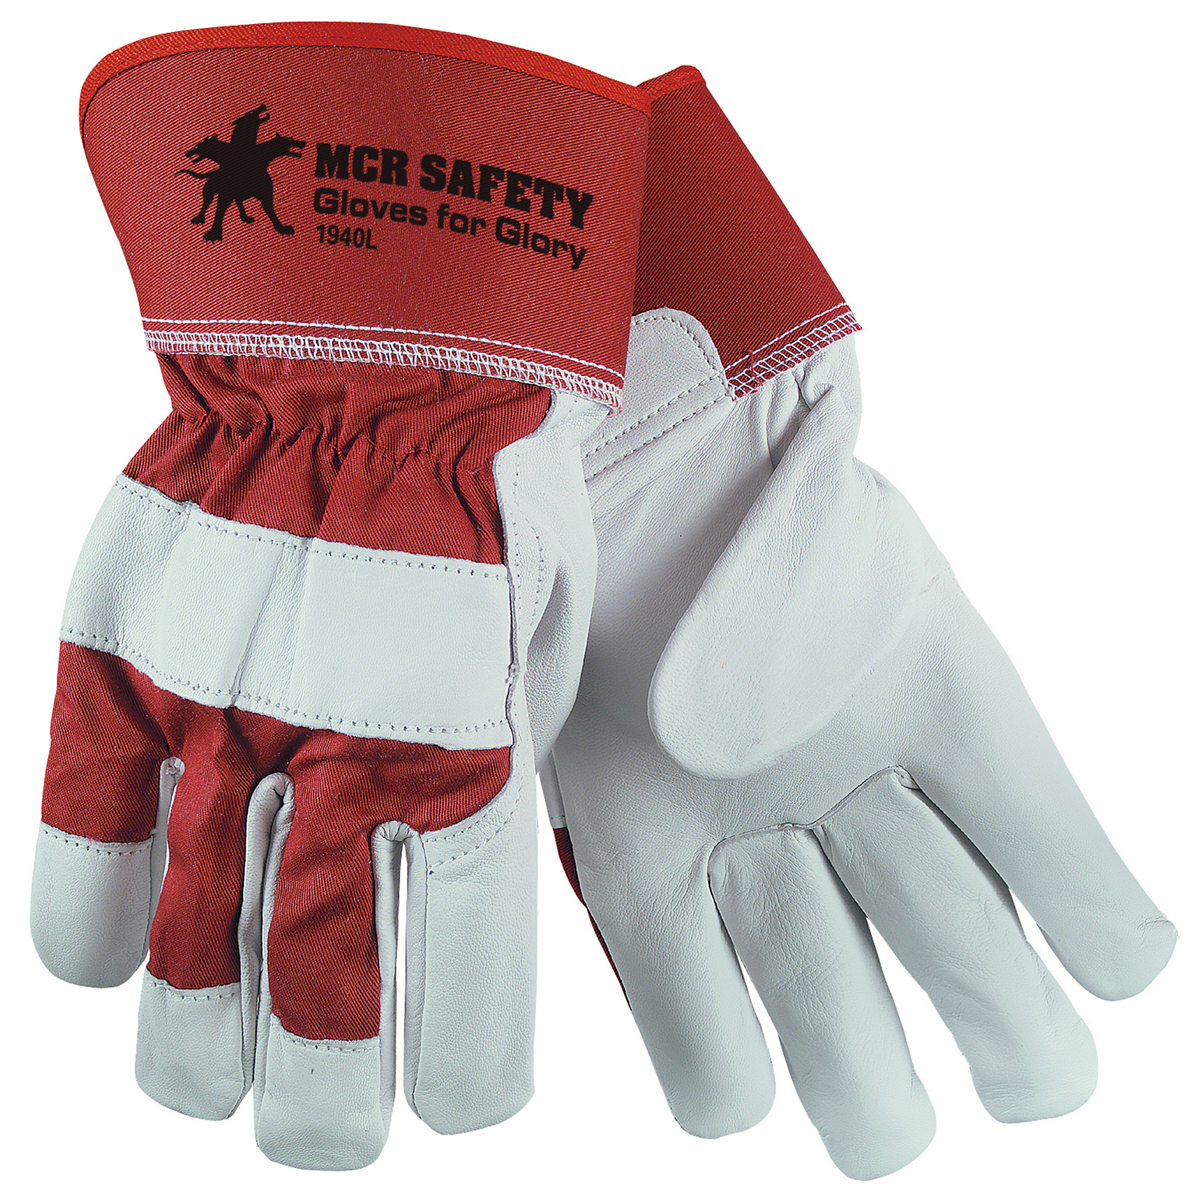 MCR Safety X-Large White And Red Premium Grain Goatskin Palm Gloves With Fabric Back And Rubberized Safety Cuff